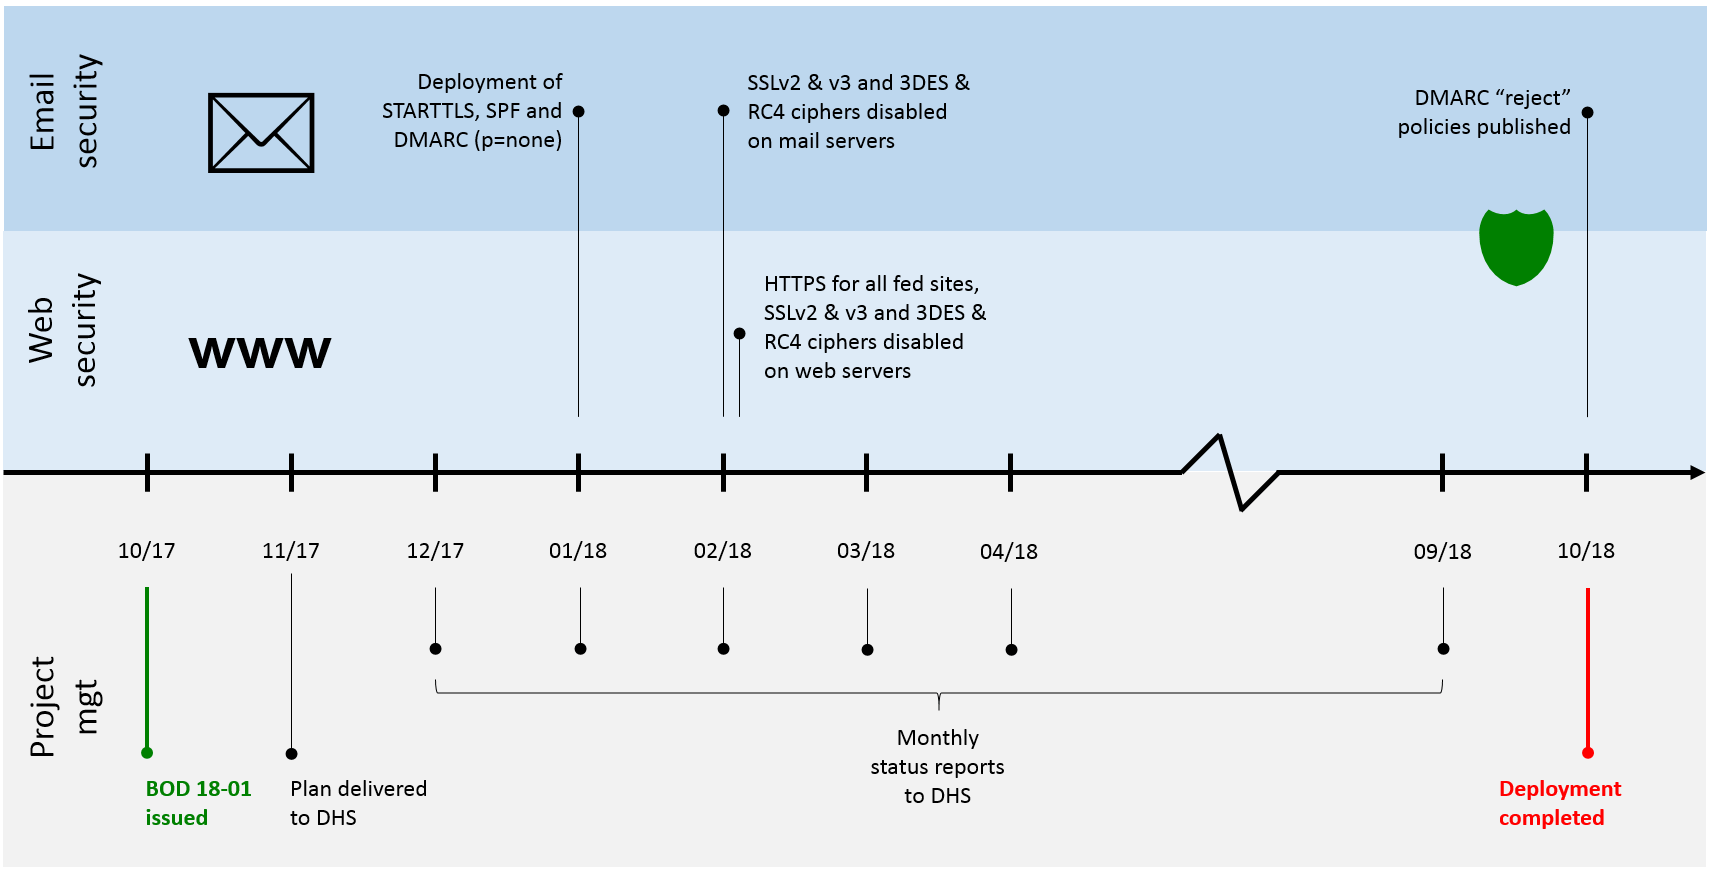 DMARC timeline issued by the DHS